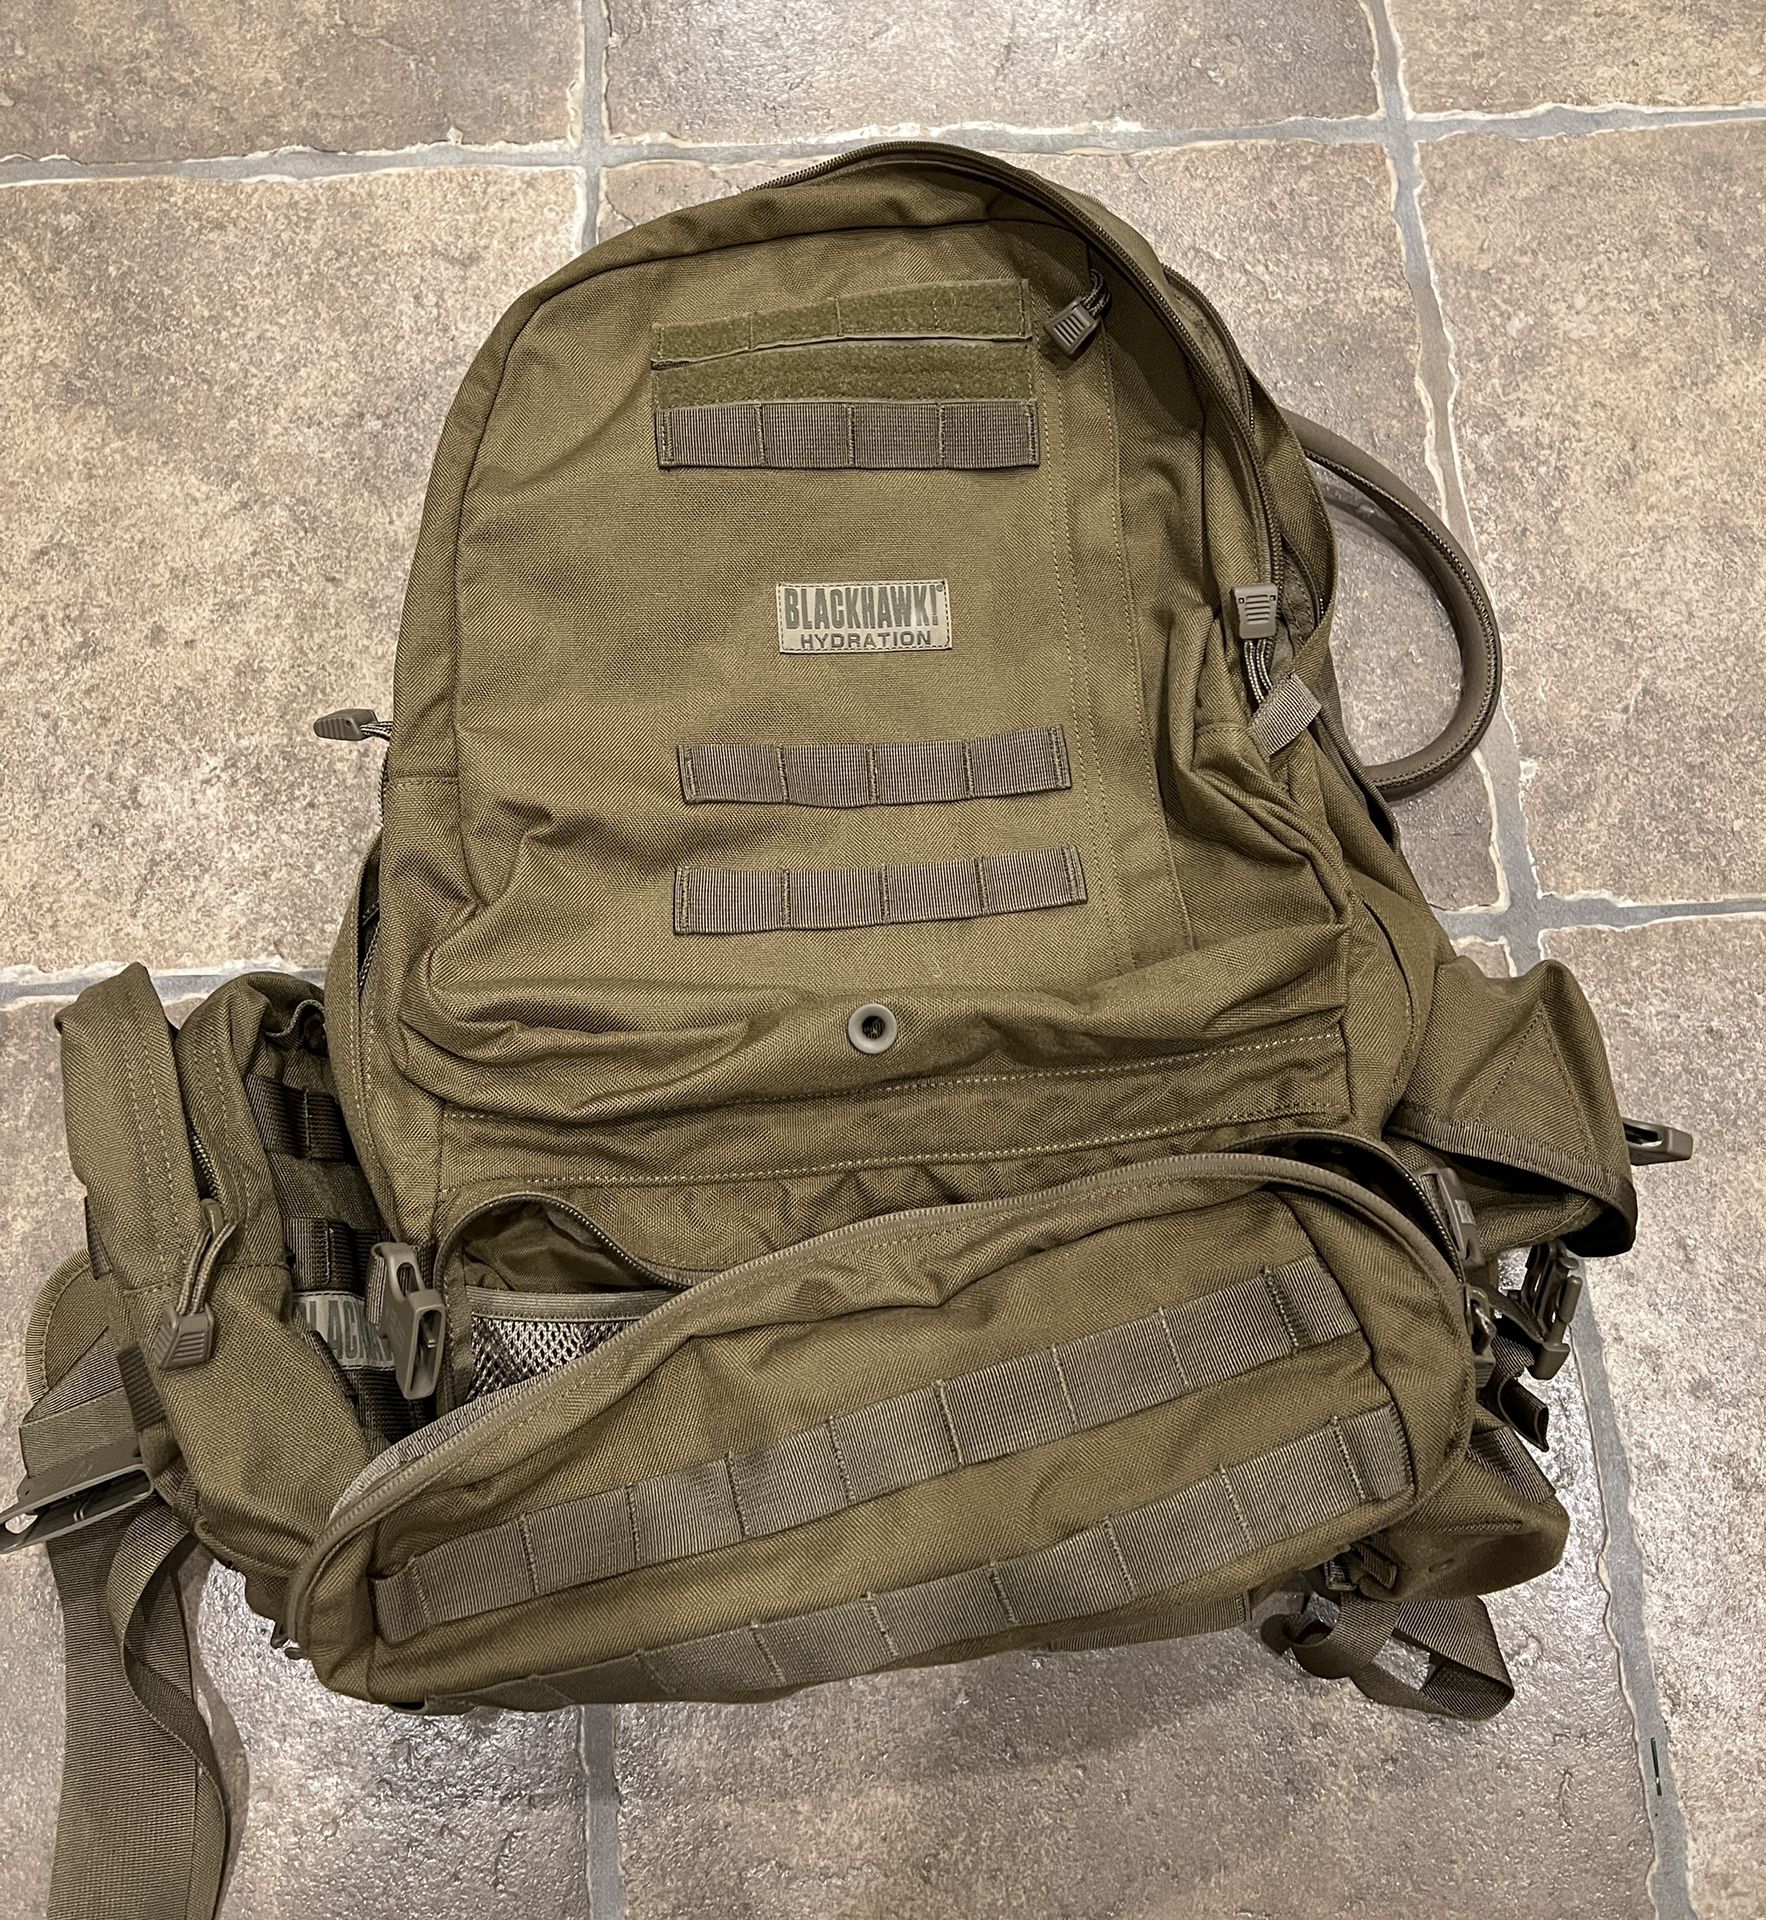 Blackhawk Backpack With 100 Oz Hydration Pouch